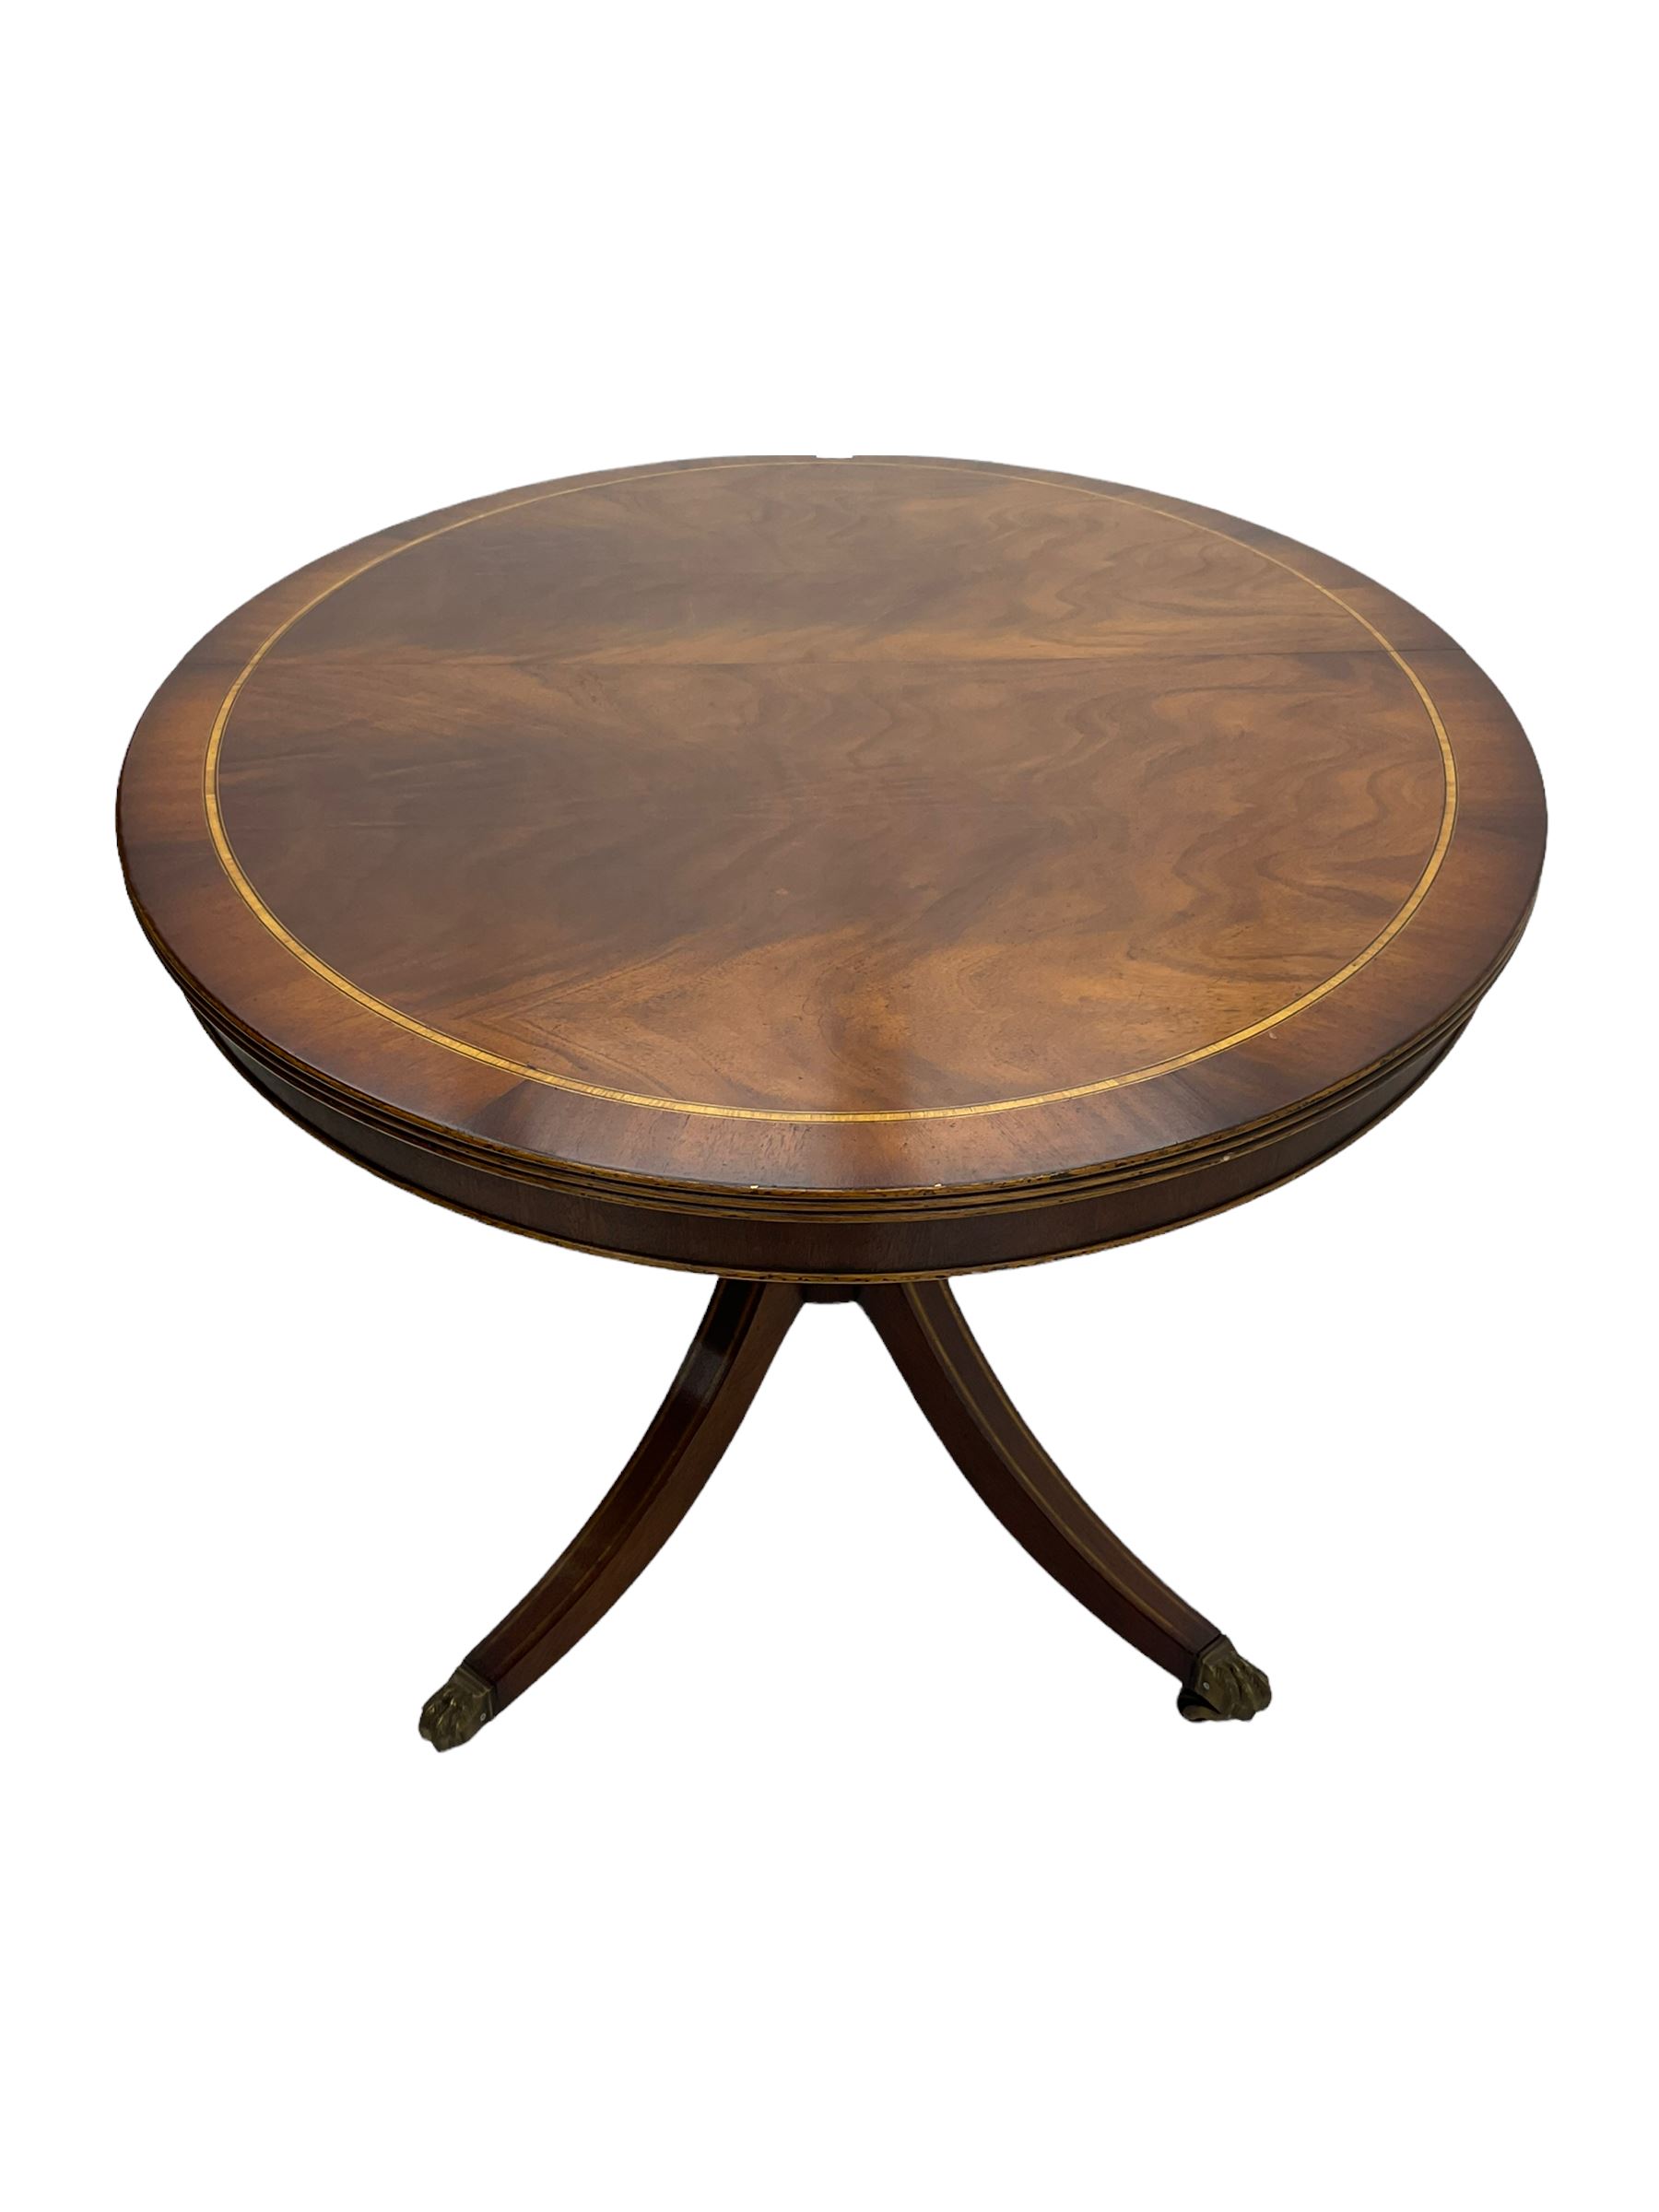 Georgian design oval mahogany extending dining table - Image 4 of 5